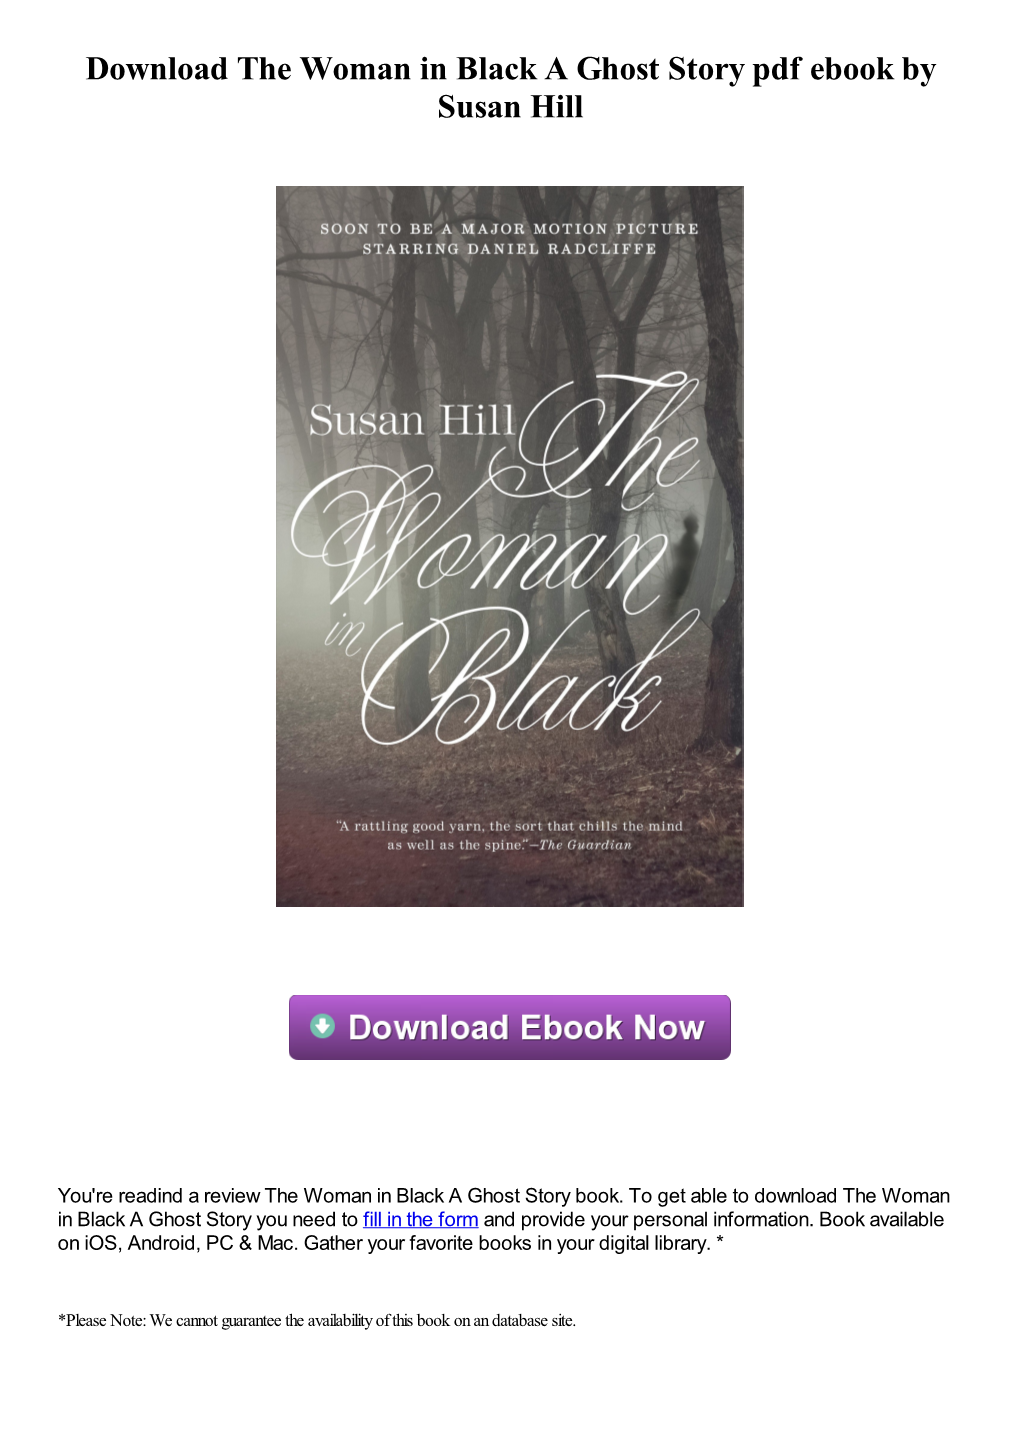 Download the Woman in Black a Ghost Story Pdf Book by Susan Hill